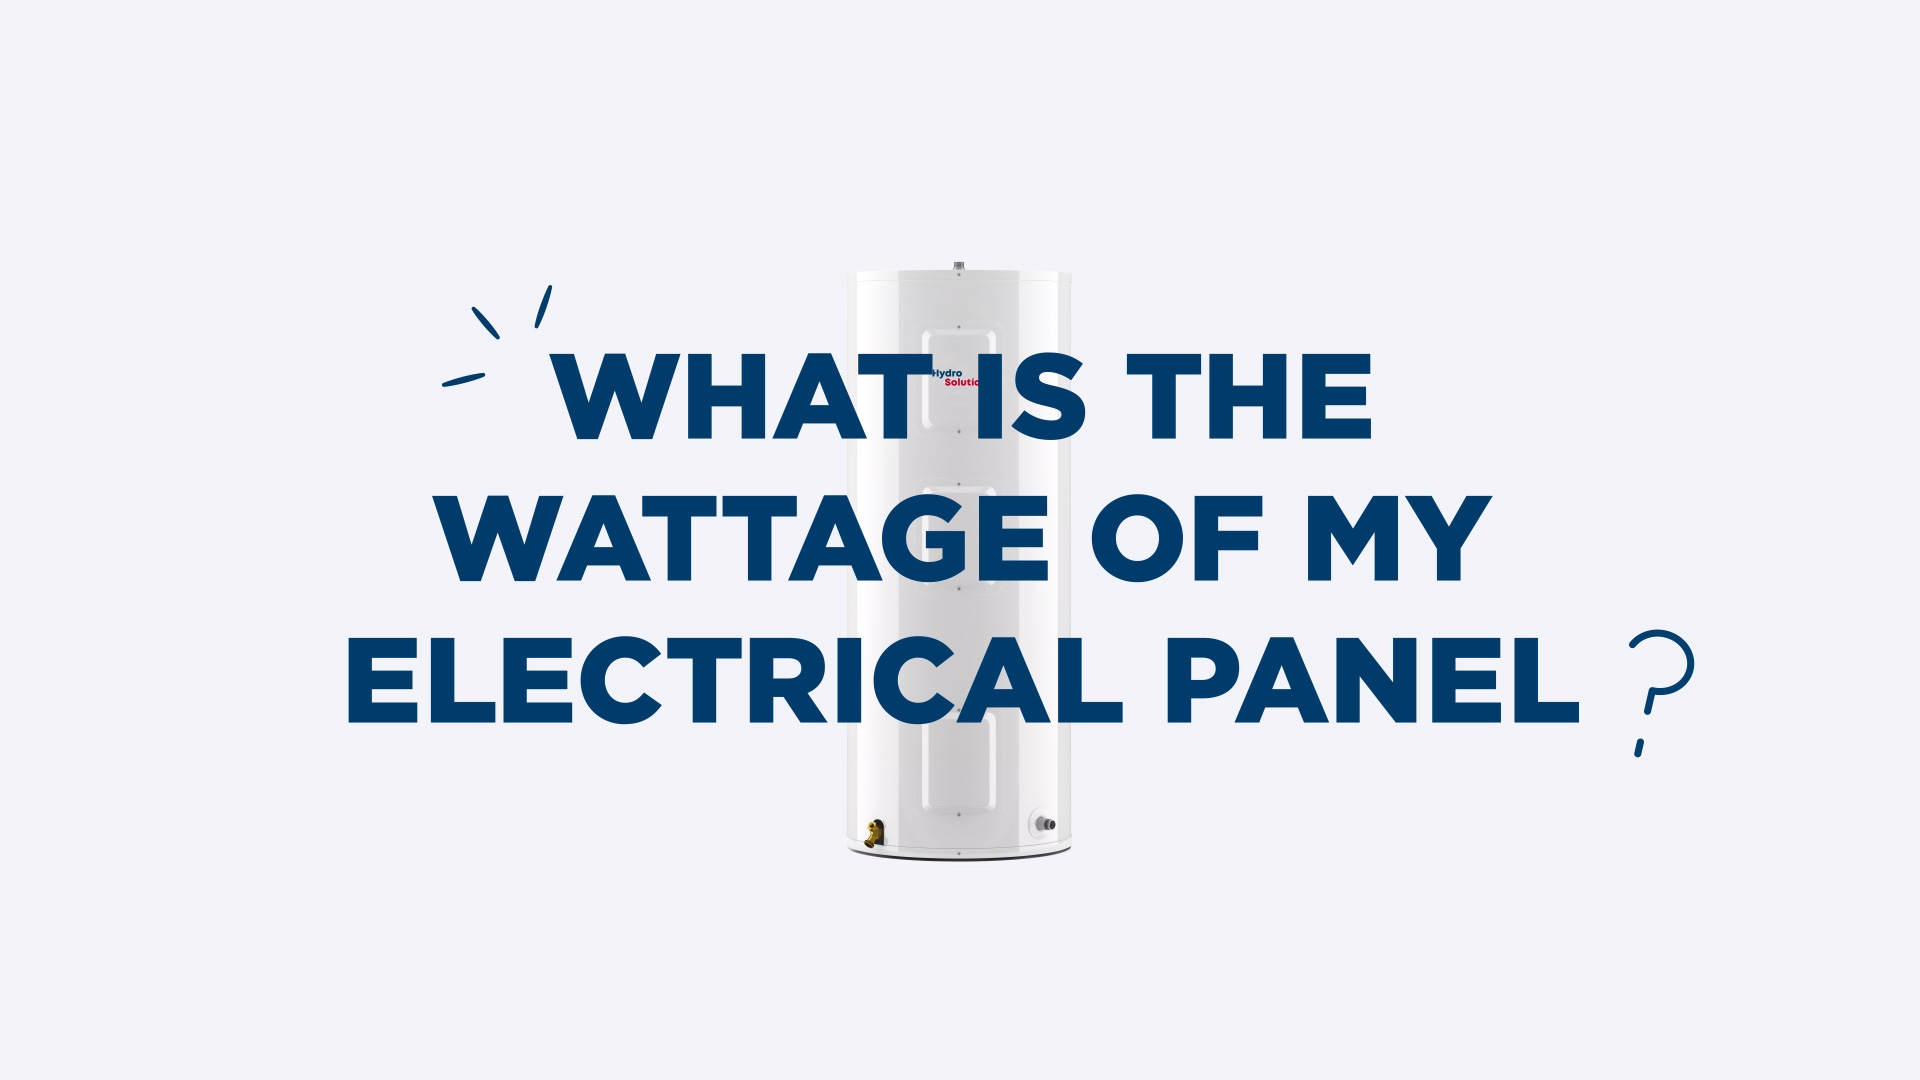 How many watts can my electrical panel handle?